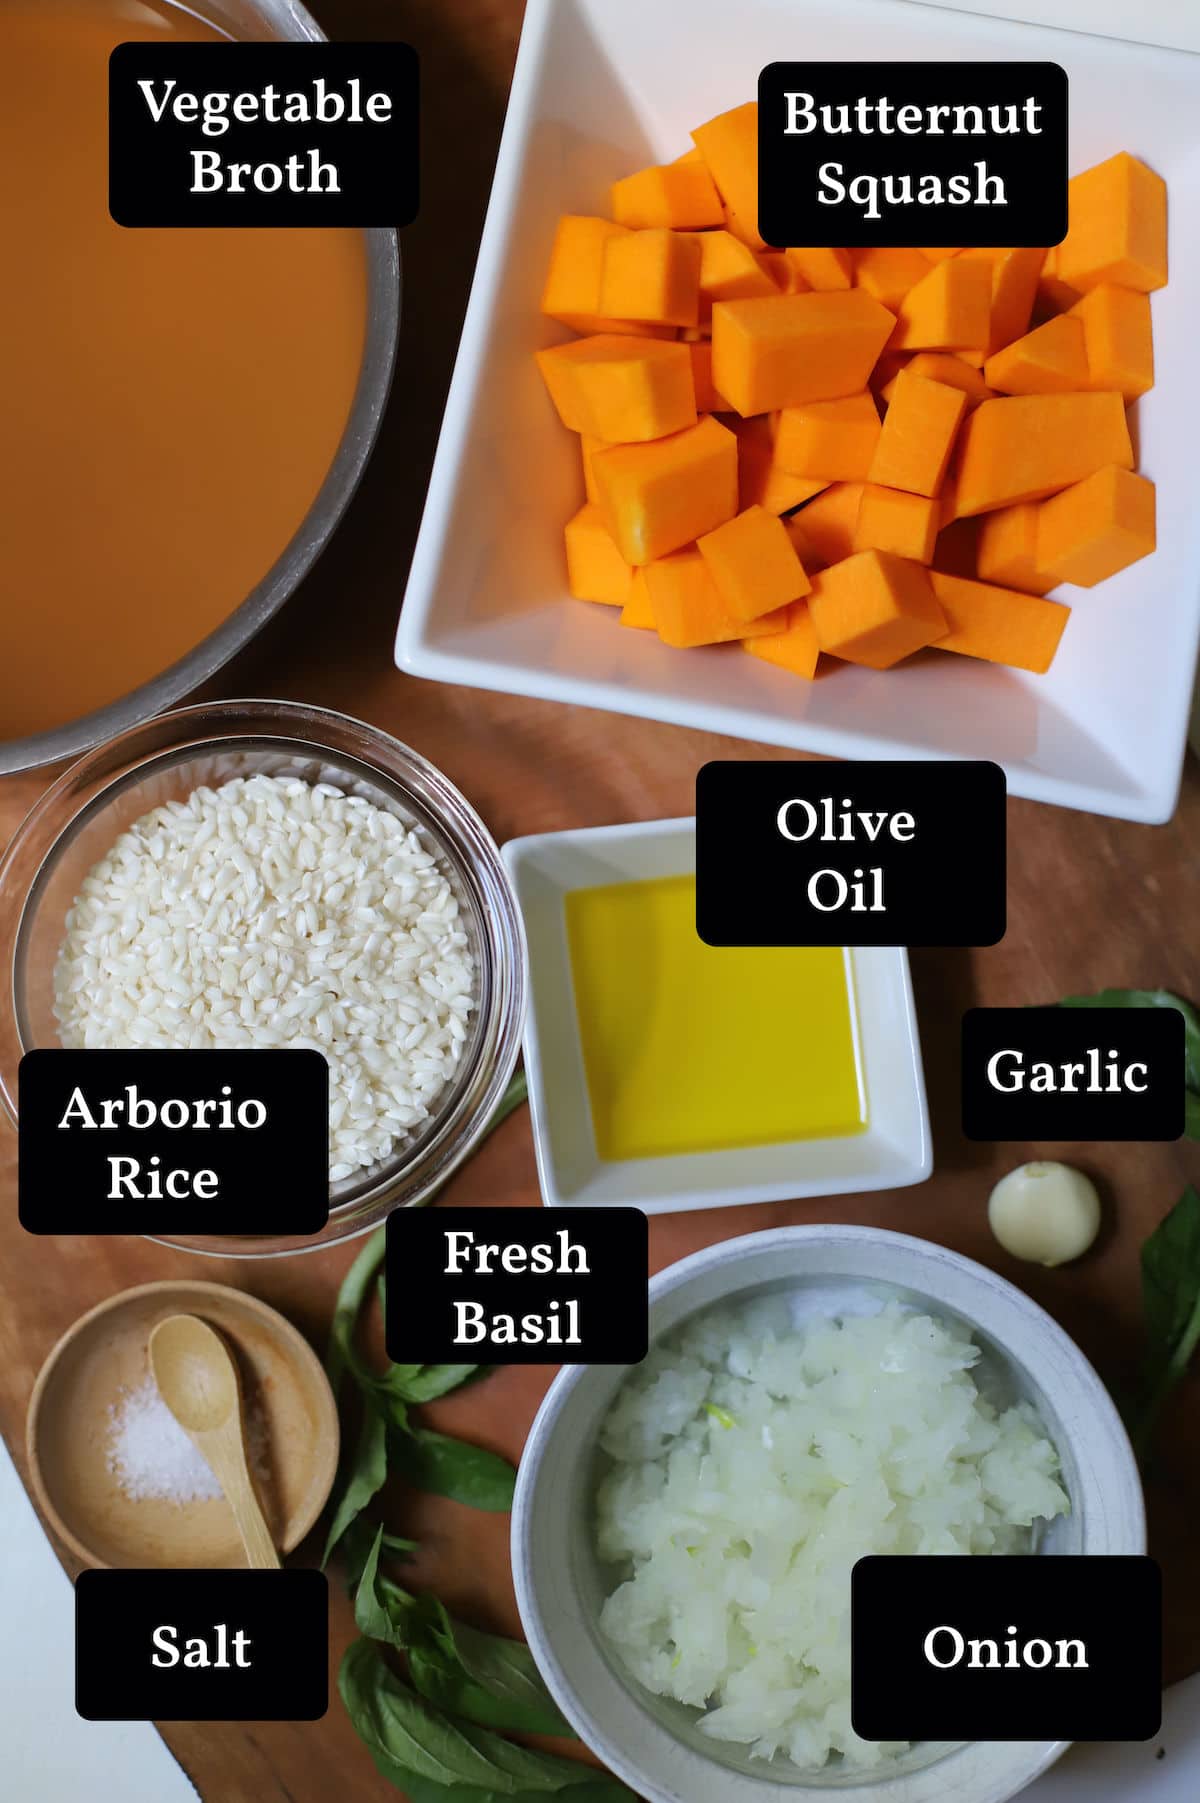 Labeled ingredients for butternut squash risotto.